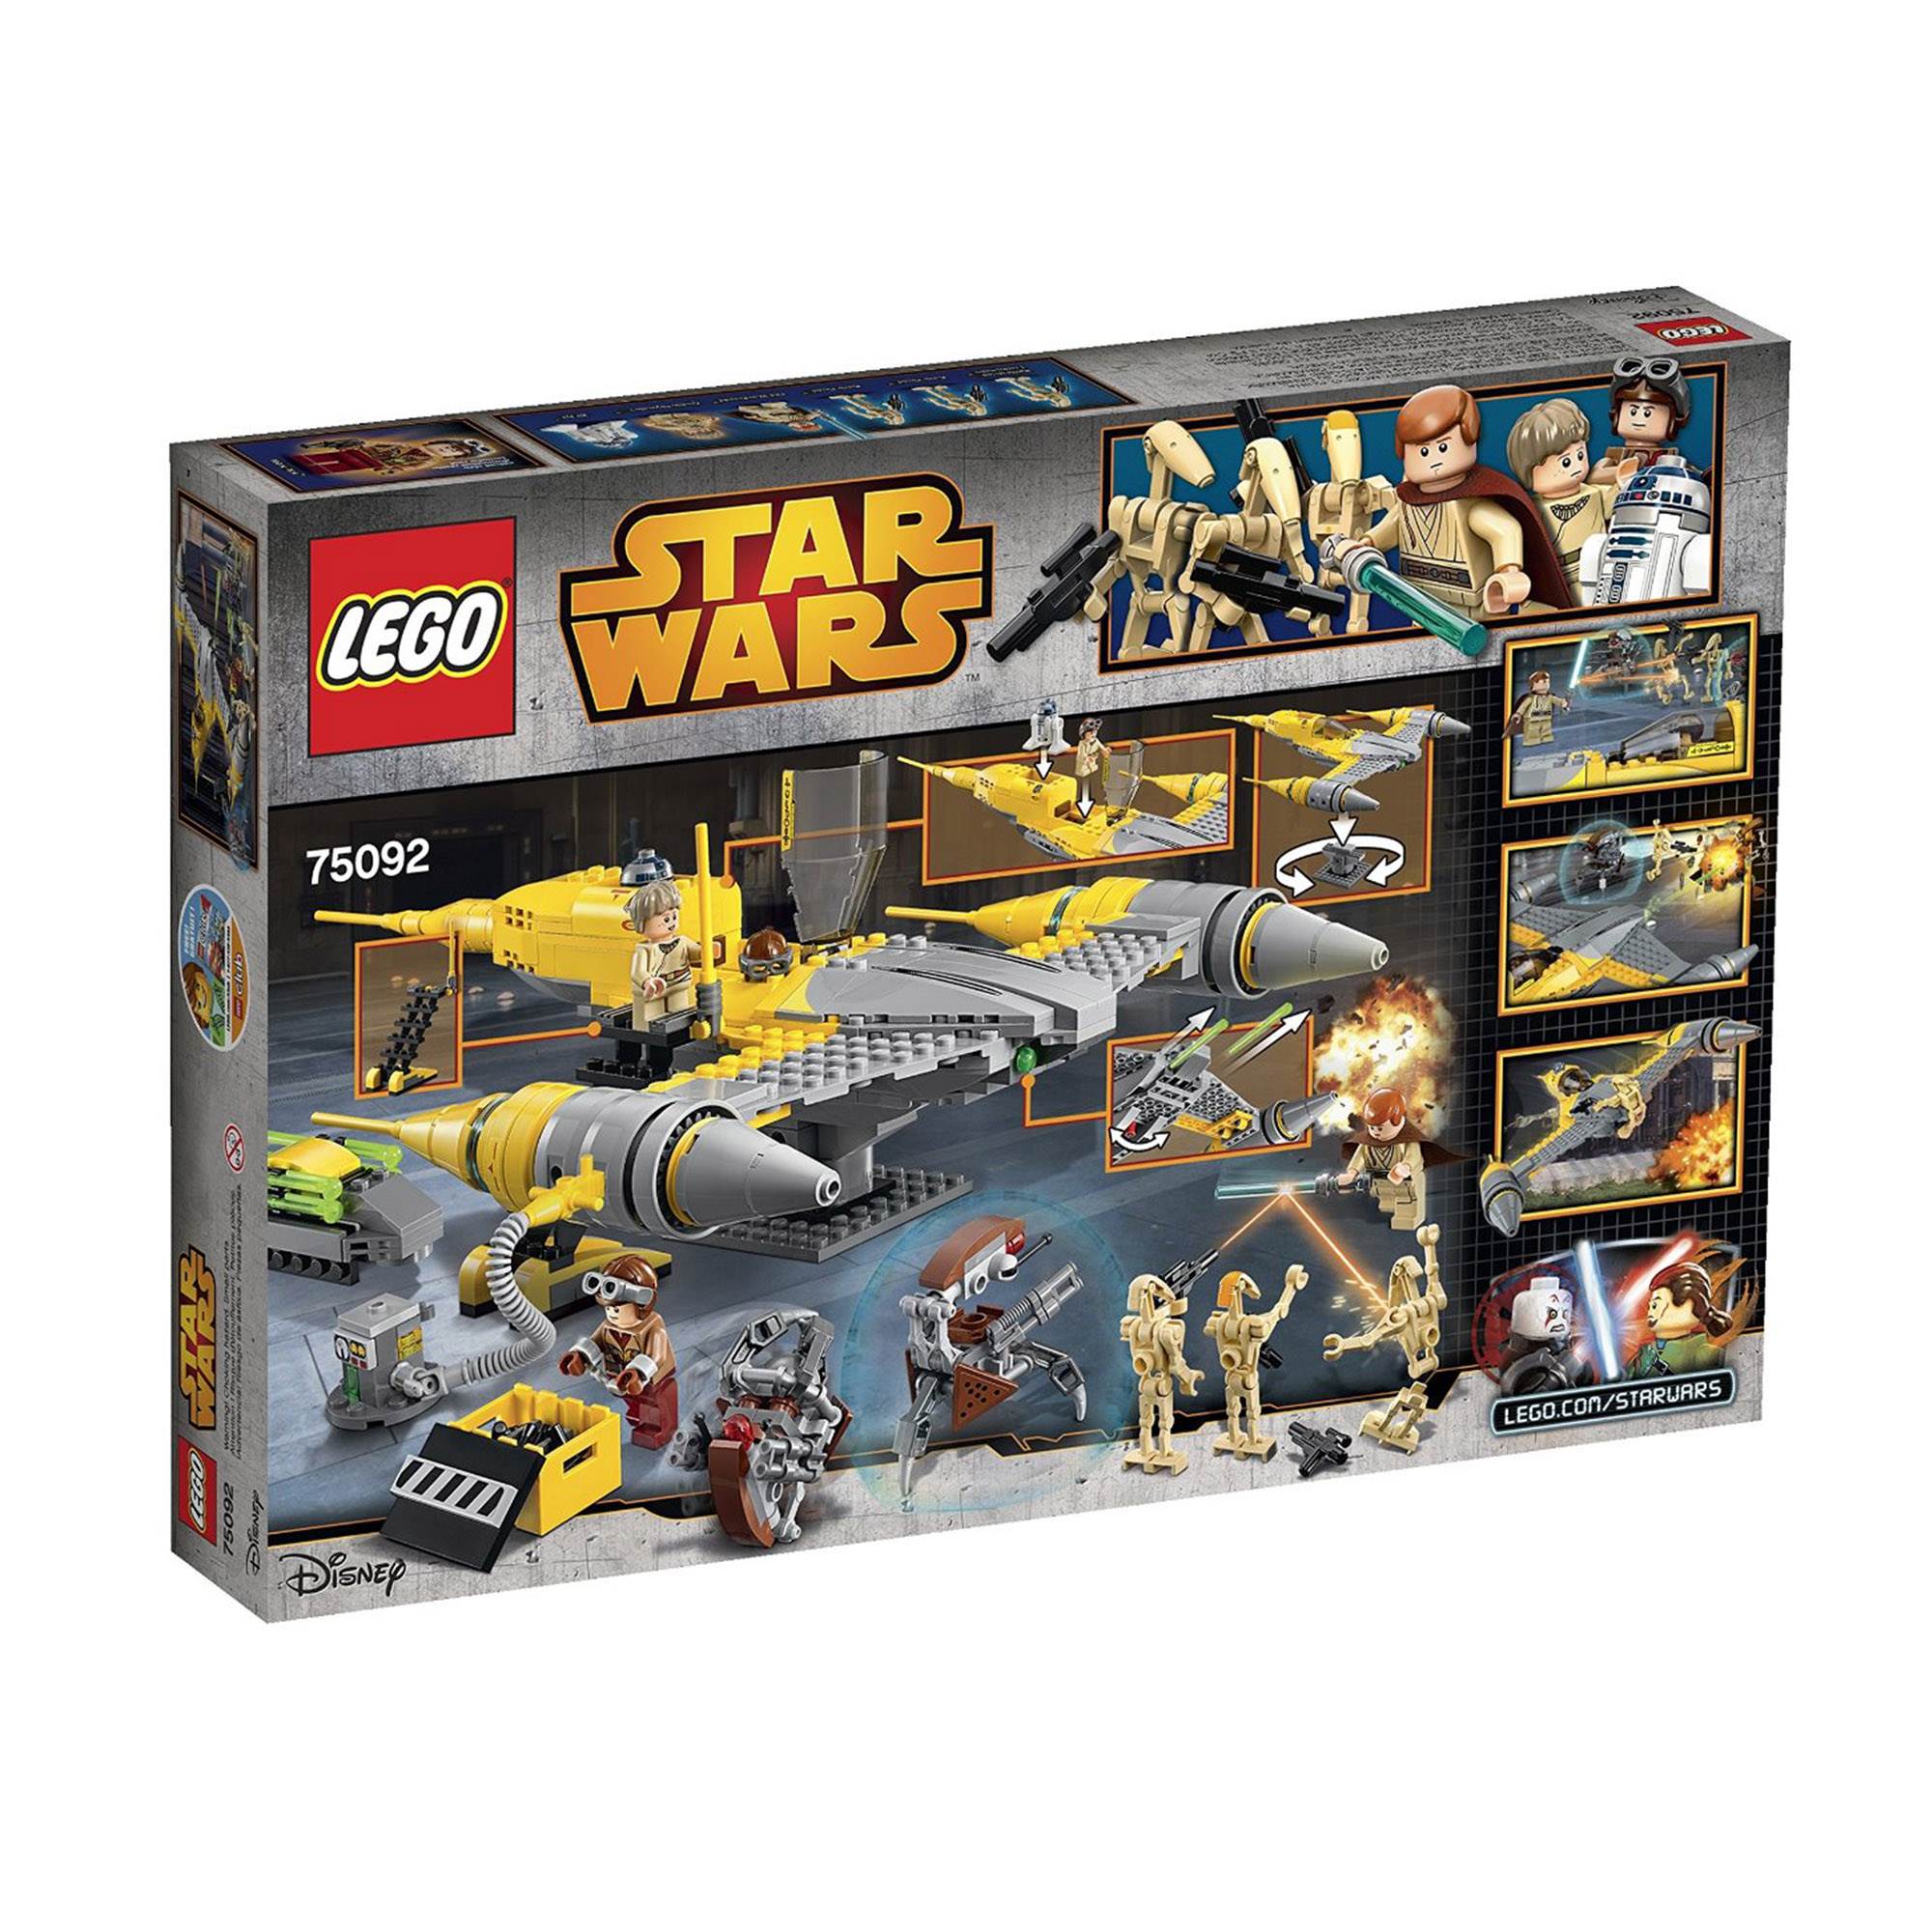 LEGO Star Wars Naboo Starfighter 75092 Building Kit - image 3 of 7